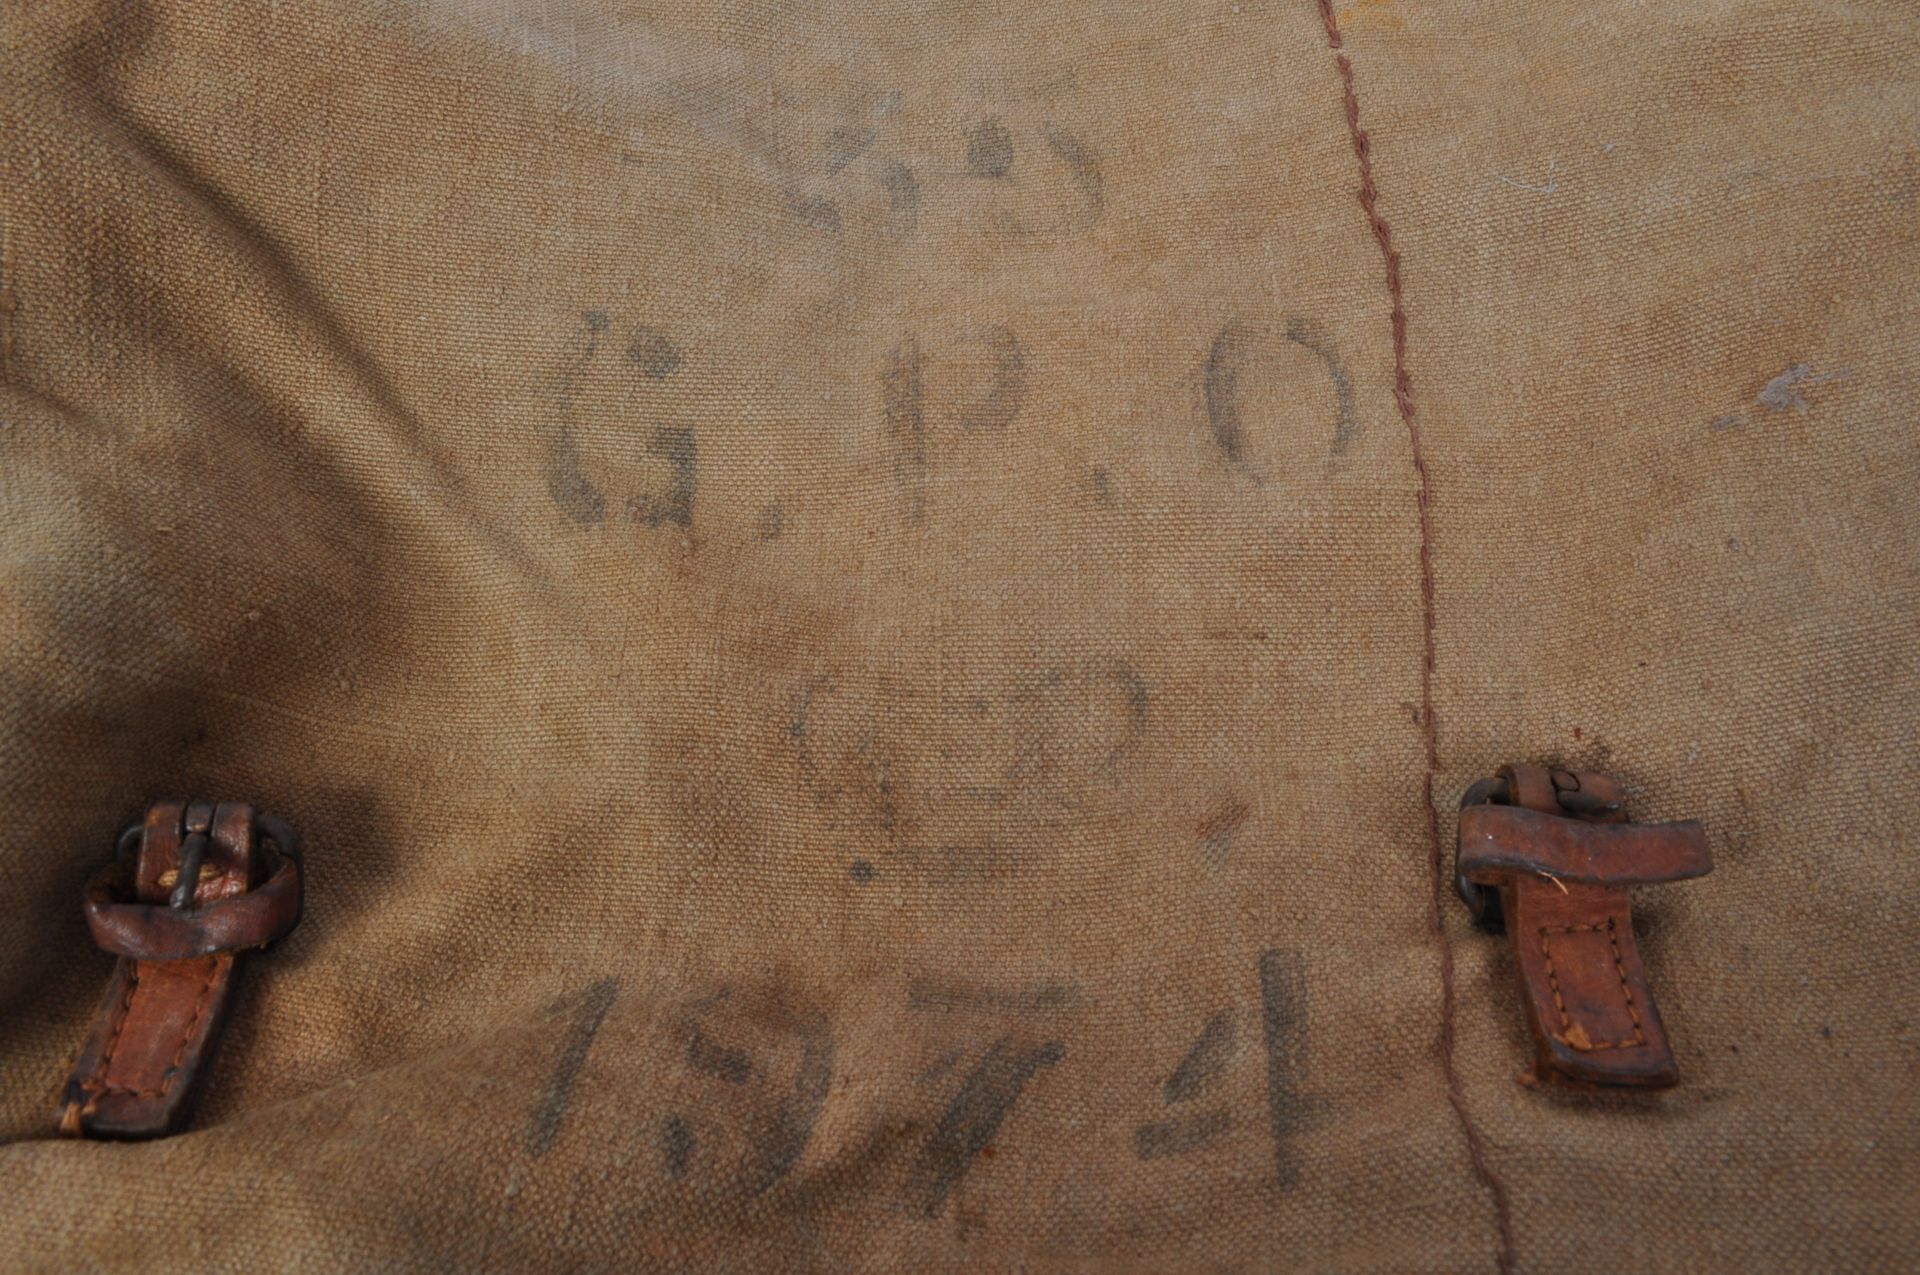 1974 GENERAL POST OFFICE CANVAS JUTE BAG - Image 3 of 5